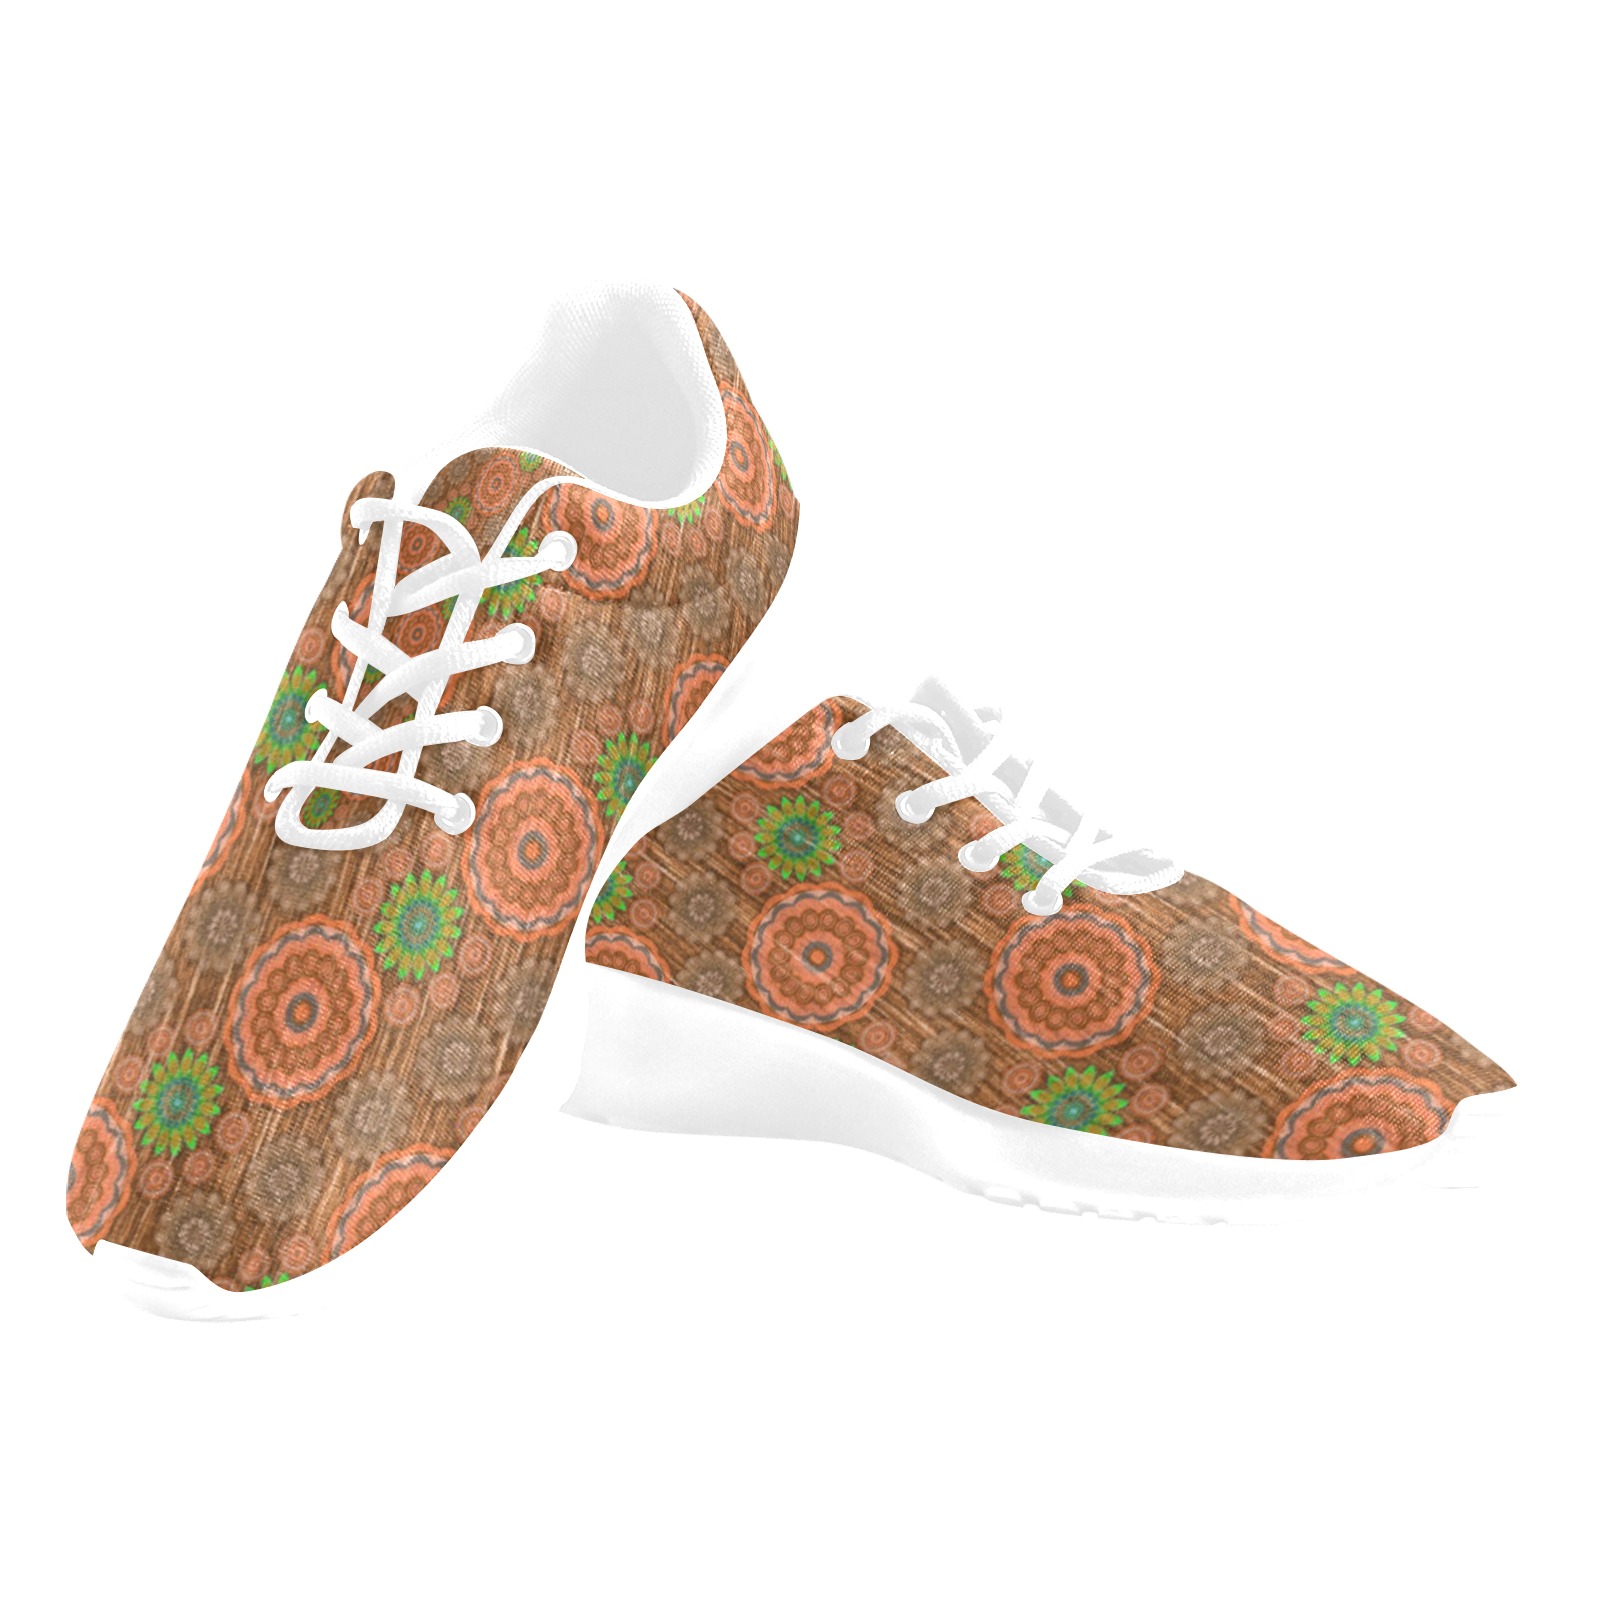 The Orange floral rainy scatter fibers textured Women's Athletic Shoes (Model 0200)